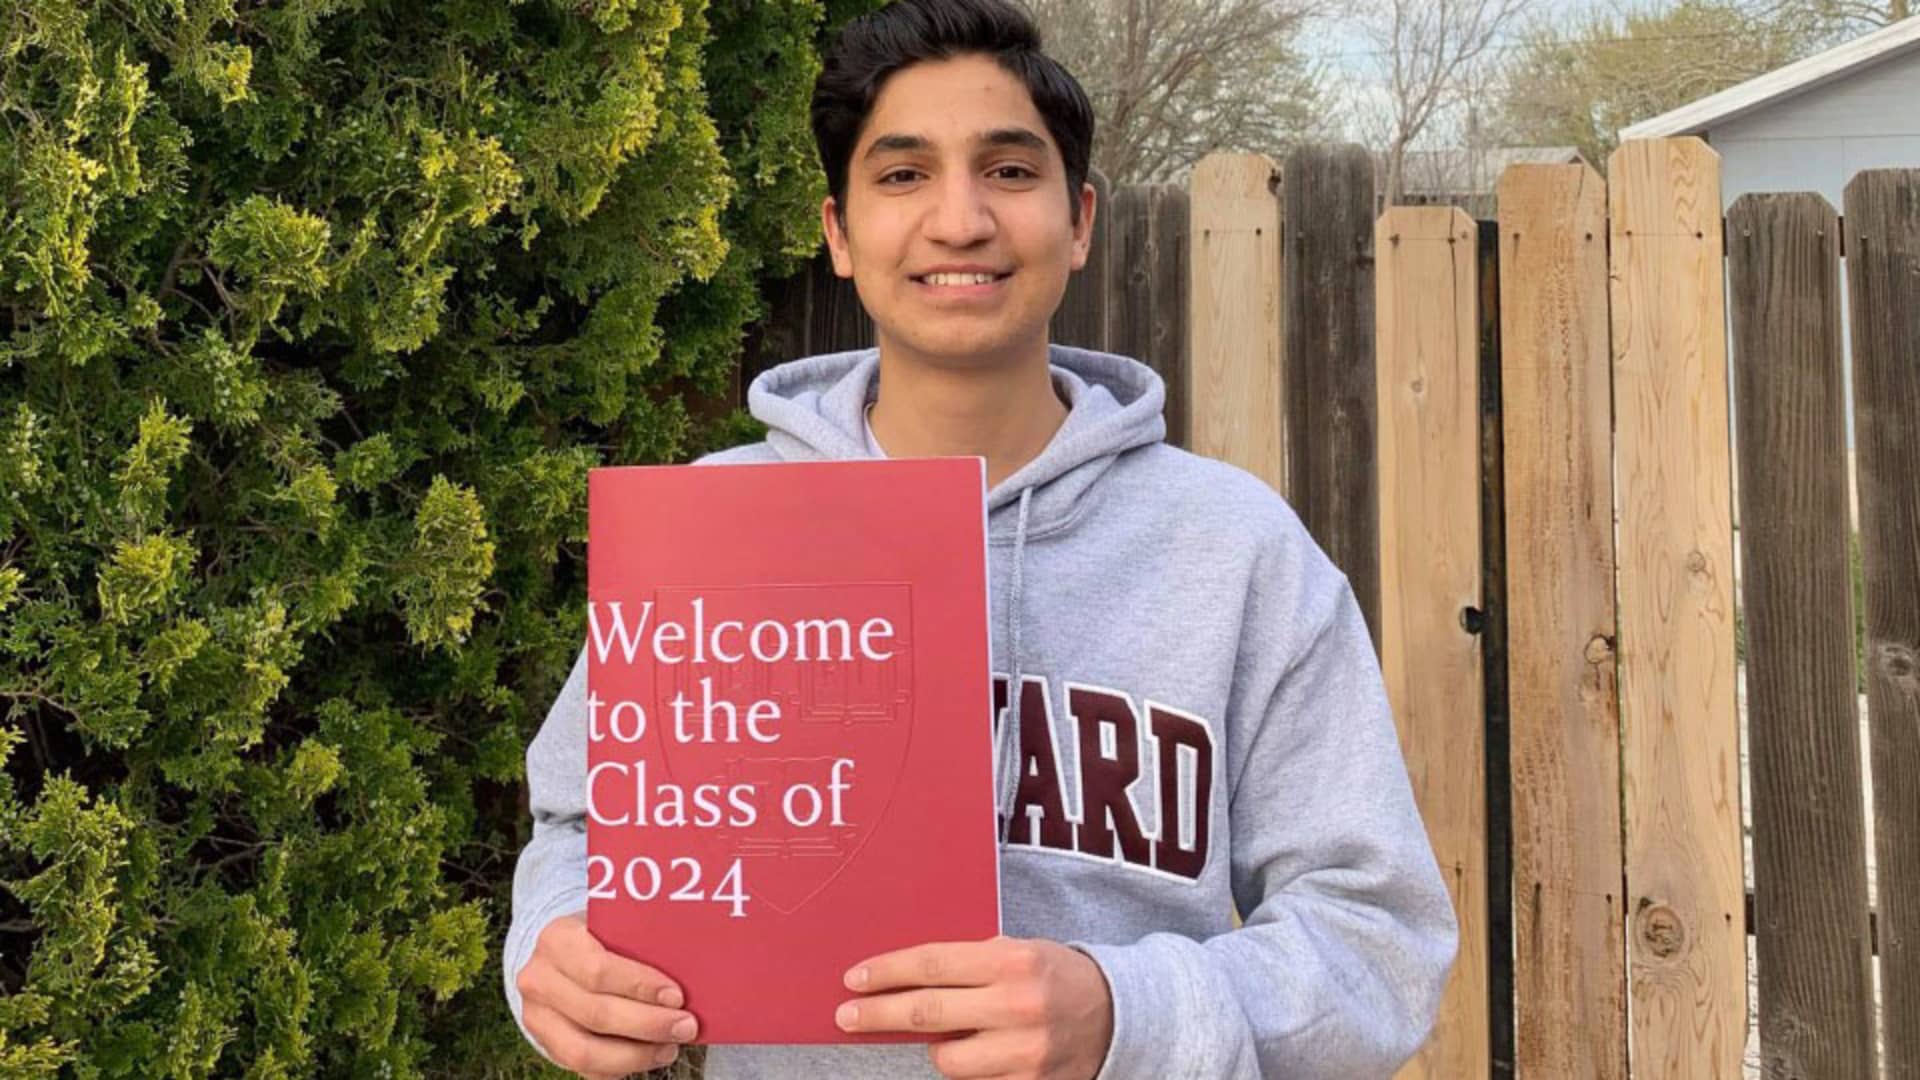 Ahmad Alsheikh, 18, was admitted to the Harvard class of 2024.